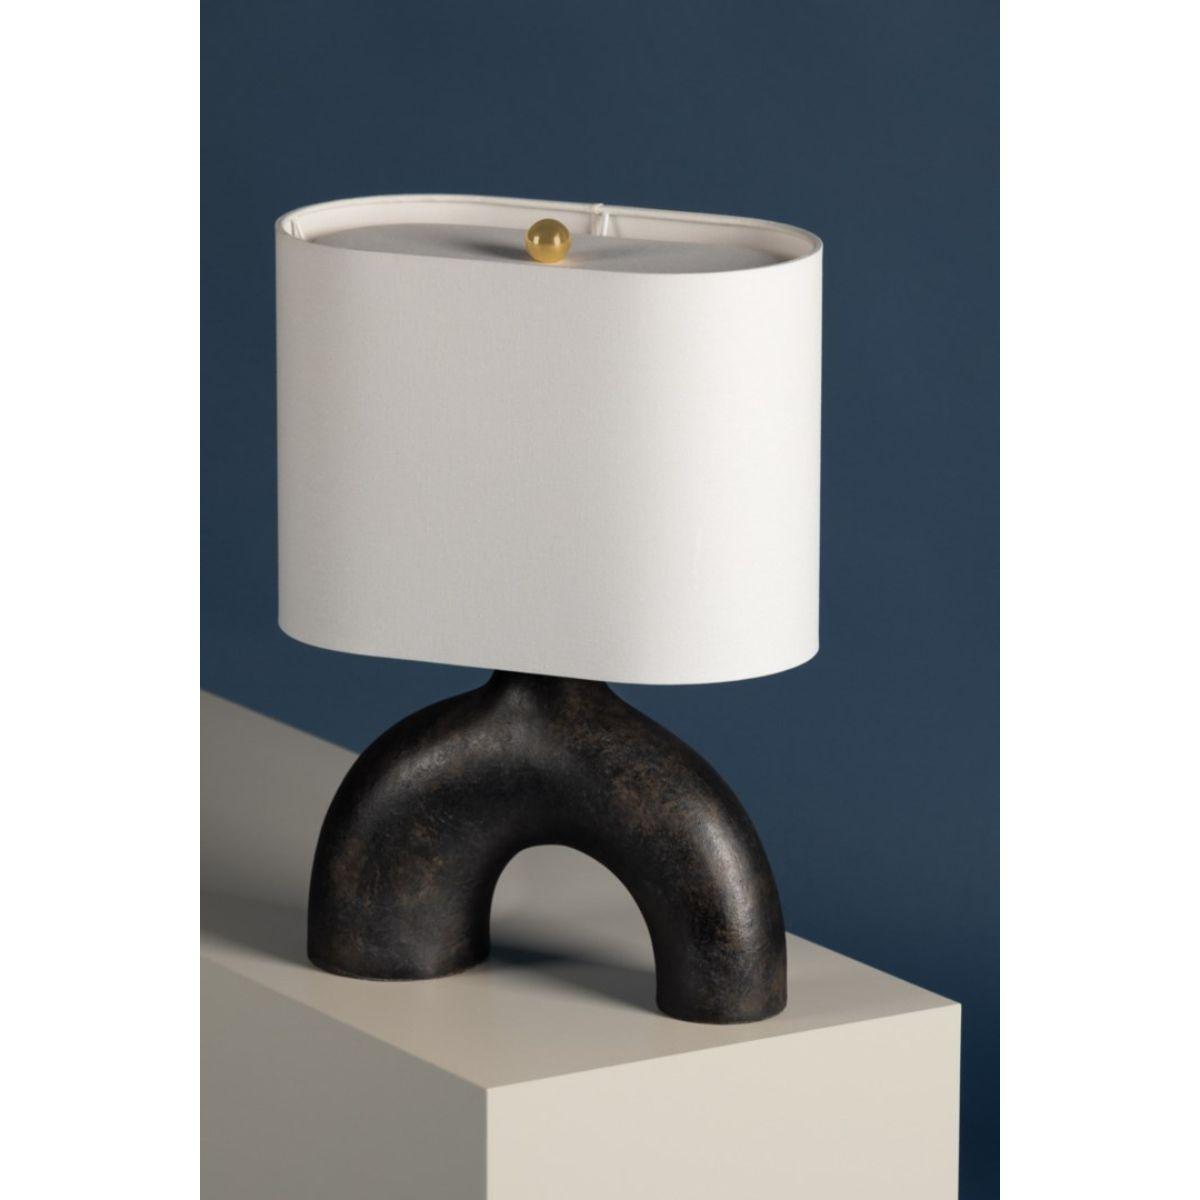 Valhalla Table Lamp Earth Charcoal Ceramic with Aged Brass Accents